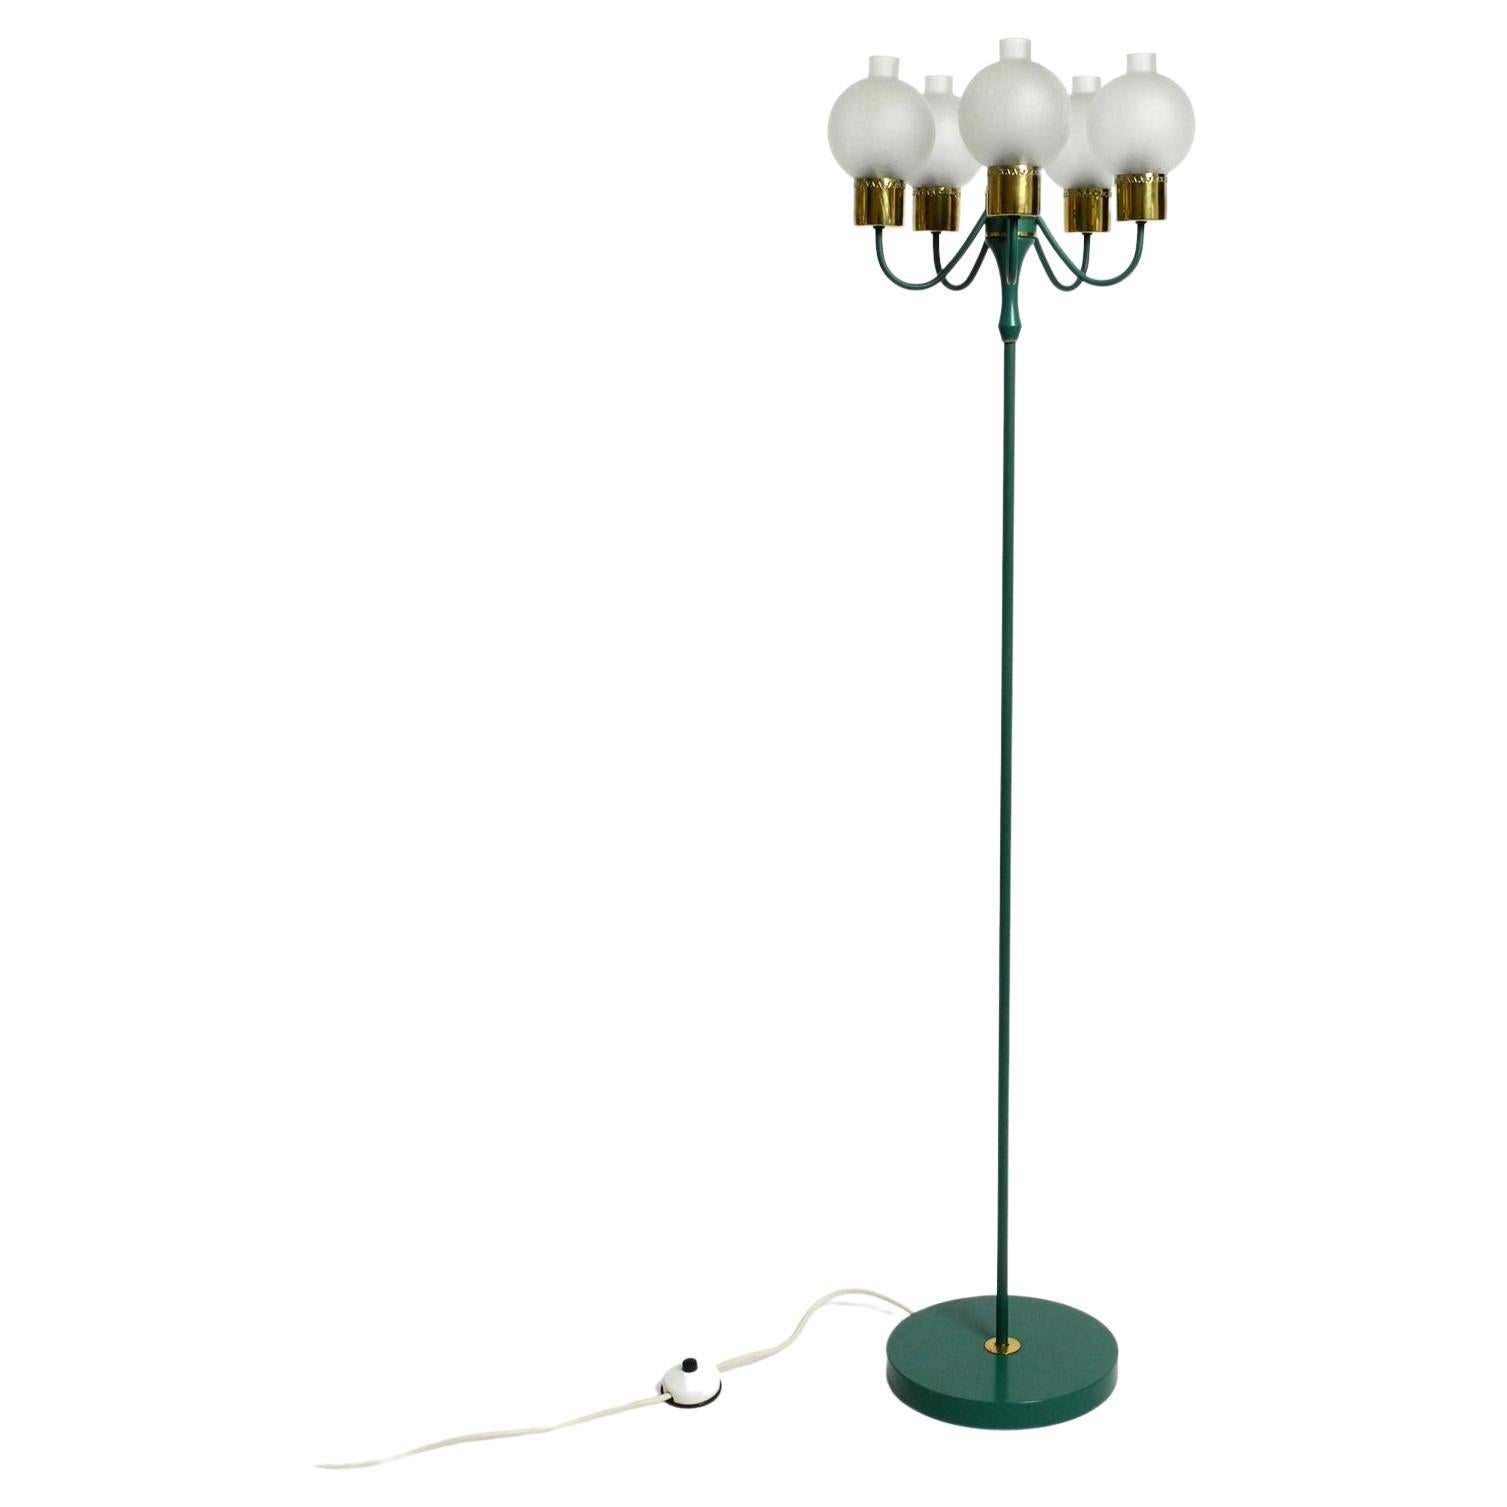 Original 1960s Kaiser Metal Floor Lamp with 5 Ice Glass Shades in Forest Green